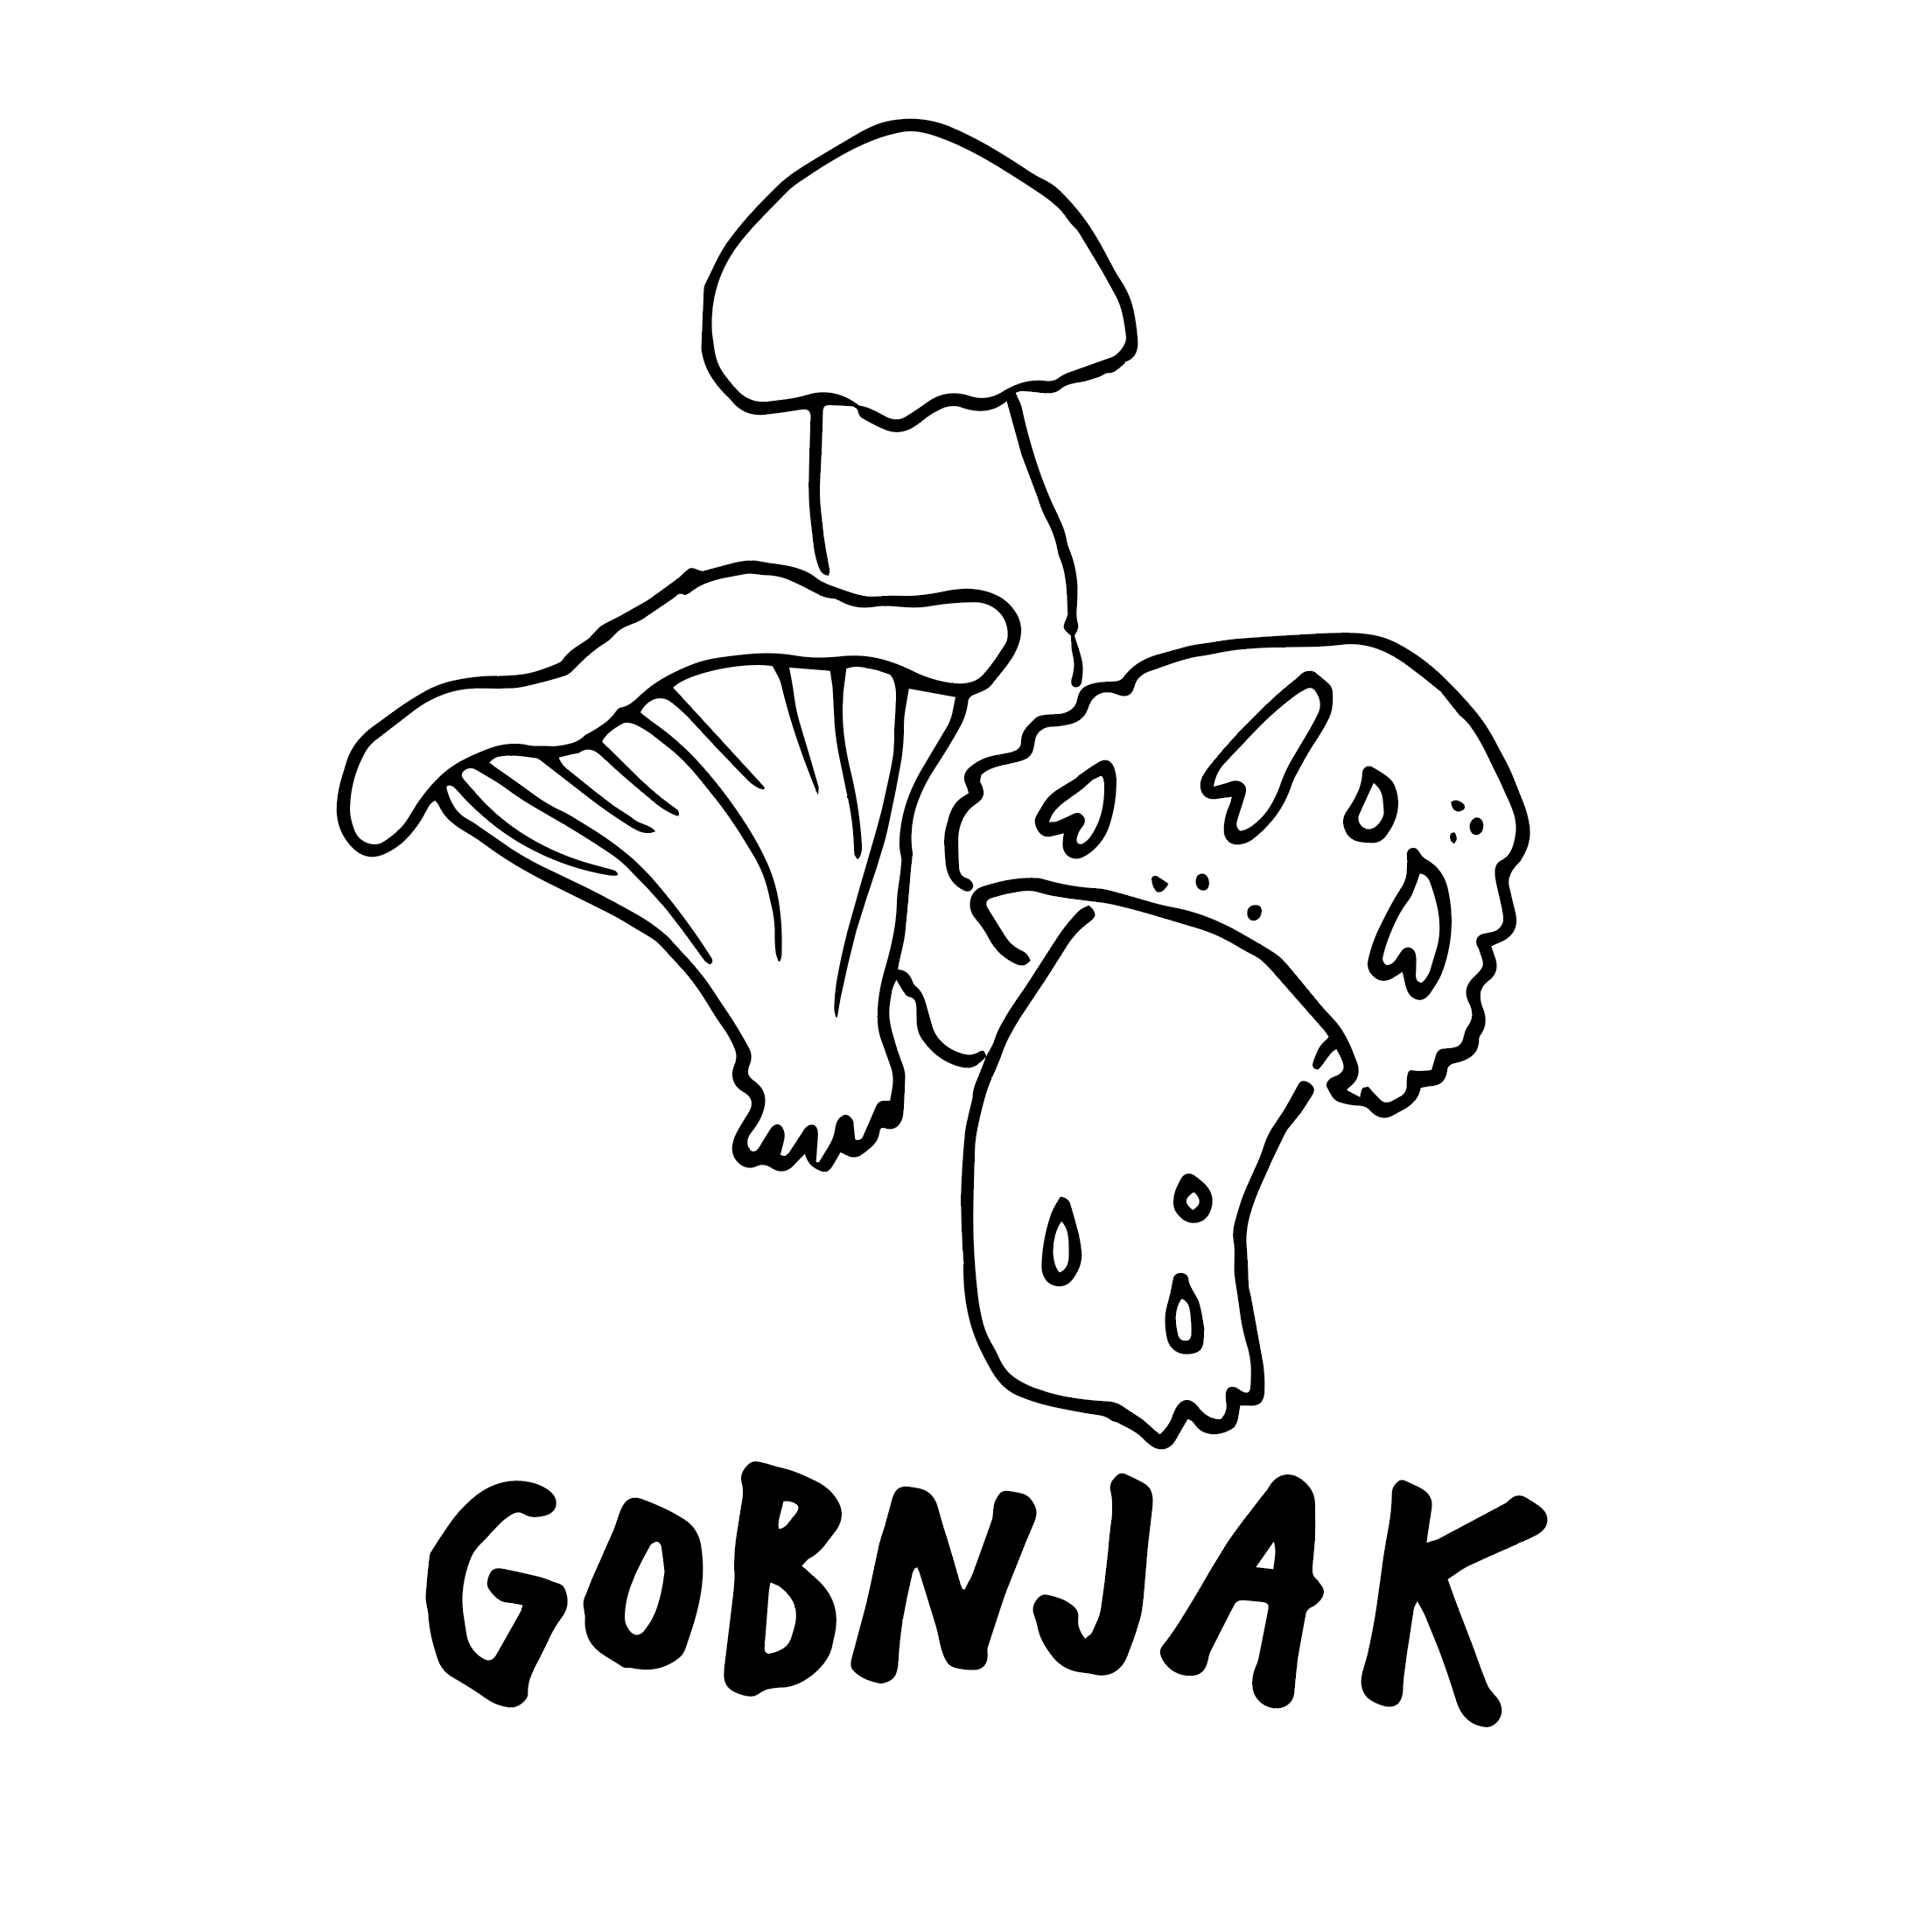 Gobnjak